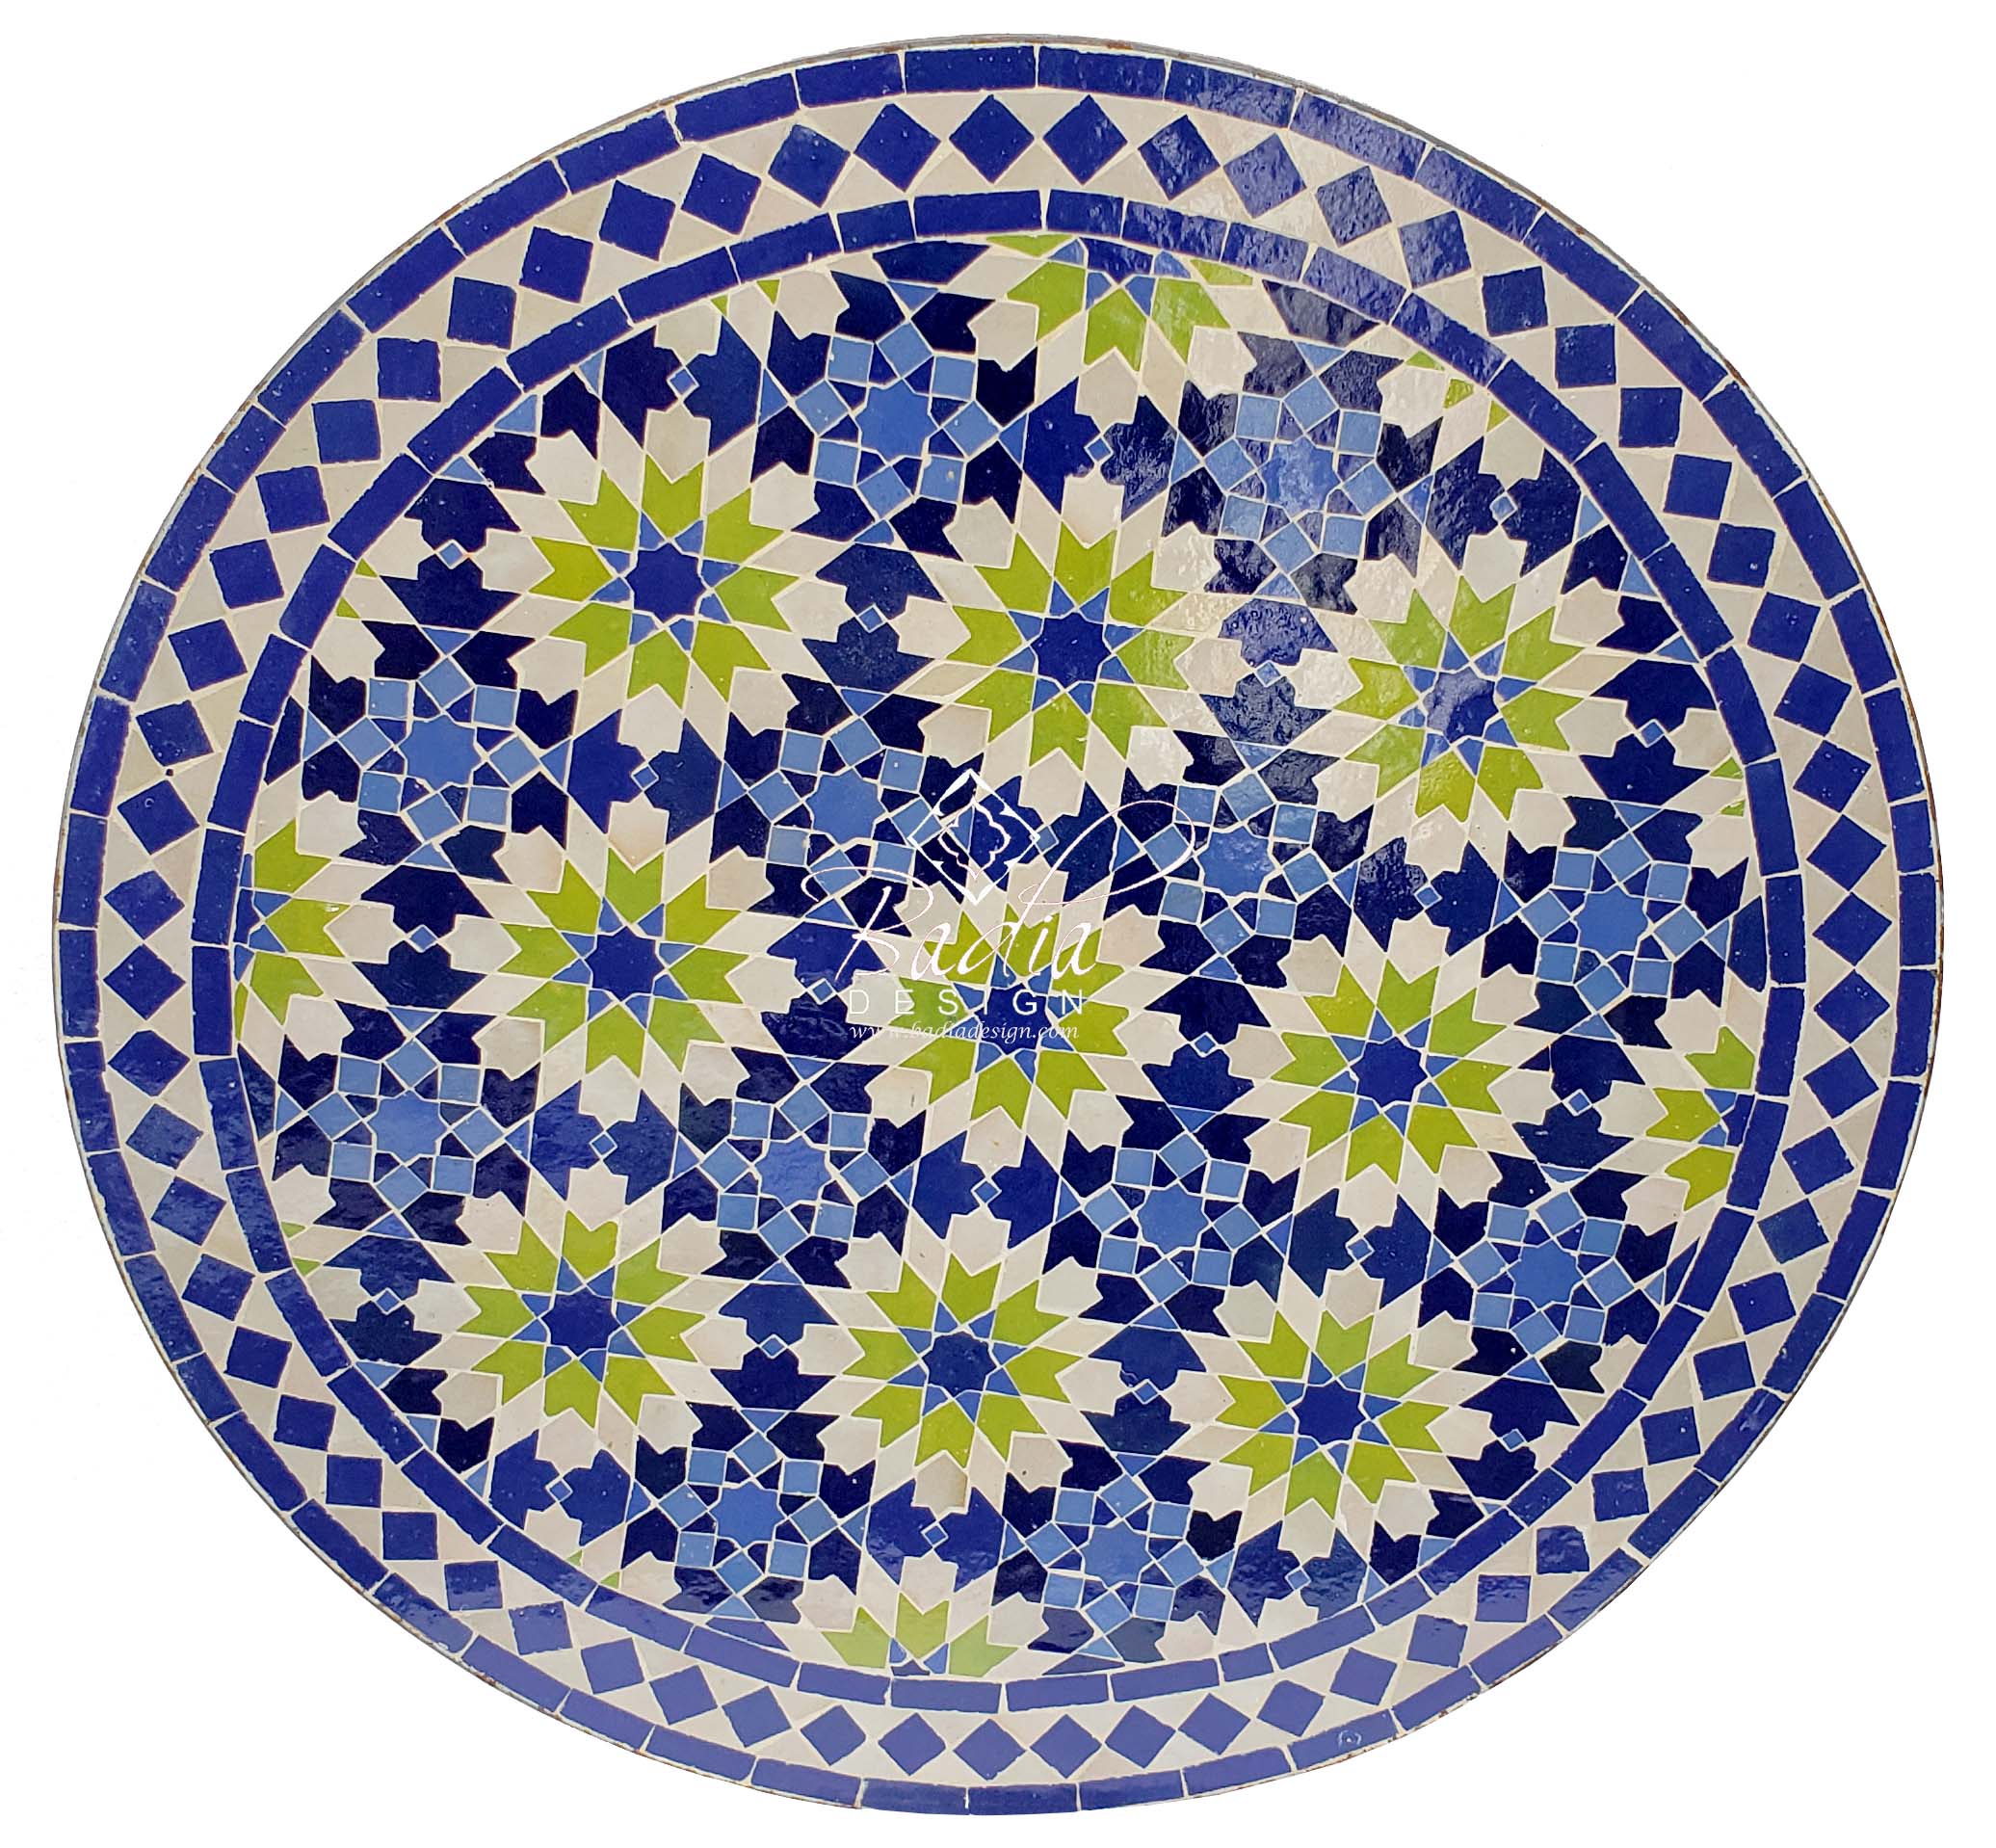 32-inch-moroccan-mosaic-tile-table-top-mtr335.jpg